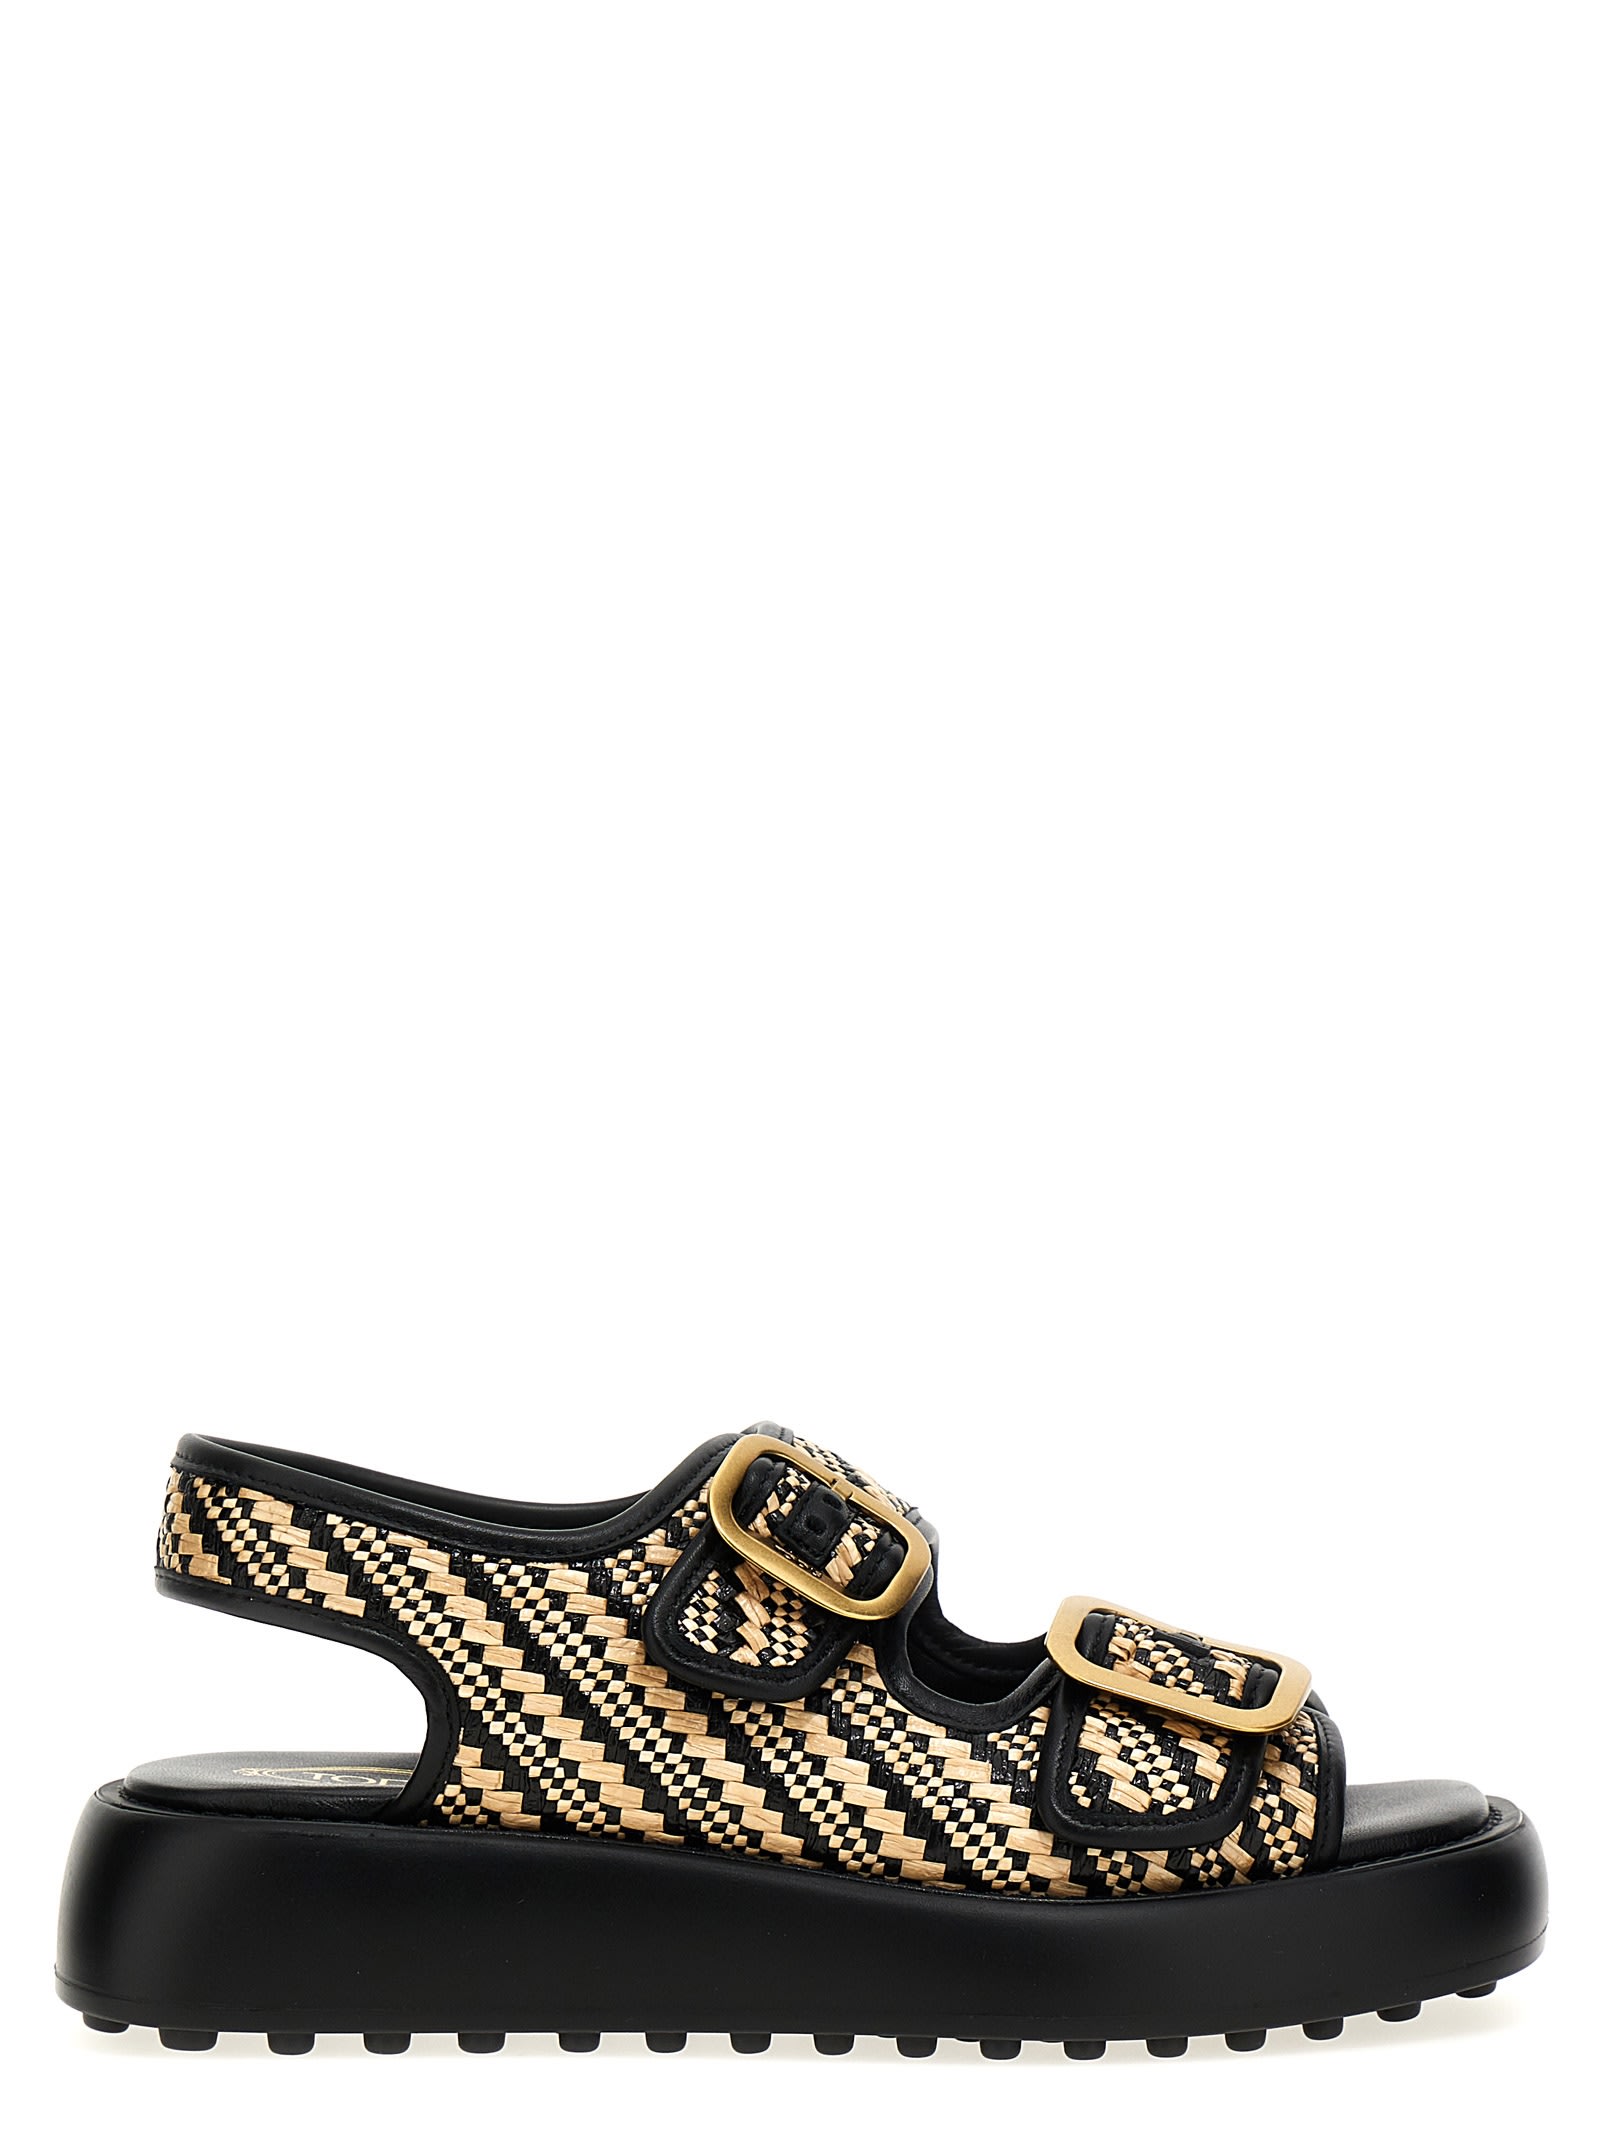 TOD'S DOUBLE BUCKLE SANDALS